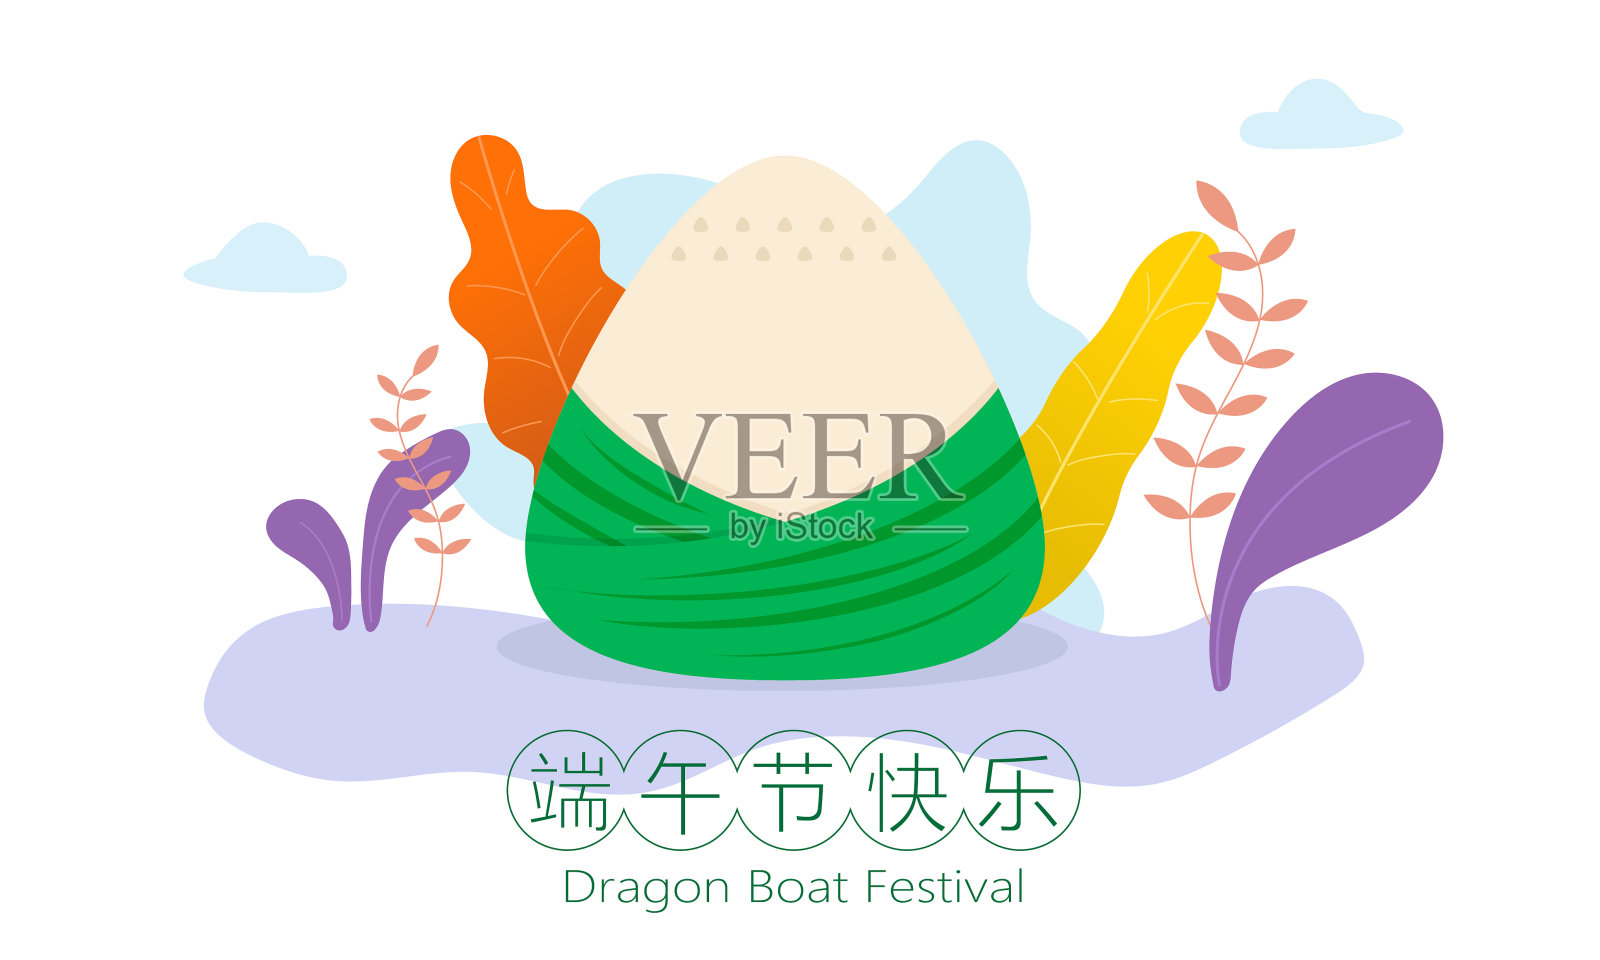 Dragon Boat Festival vector flat style illustration, Chinese traditional festival - Dragon Boat Festival插画图片素材